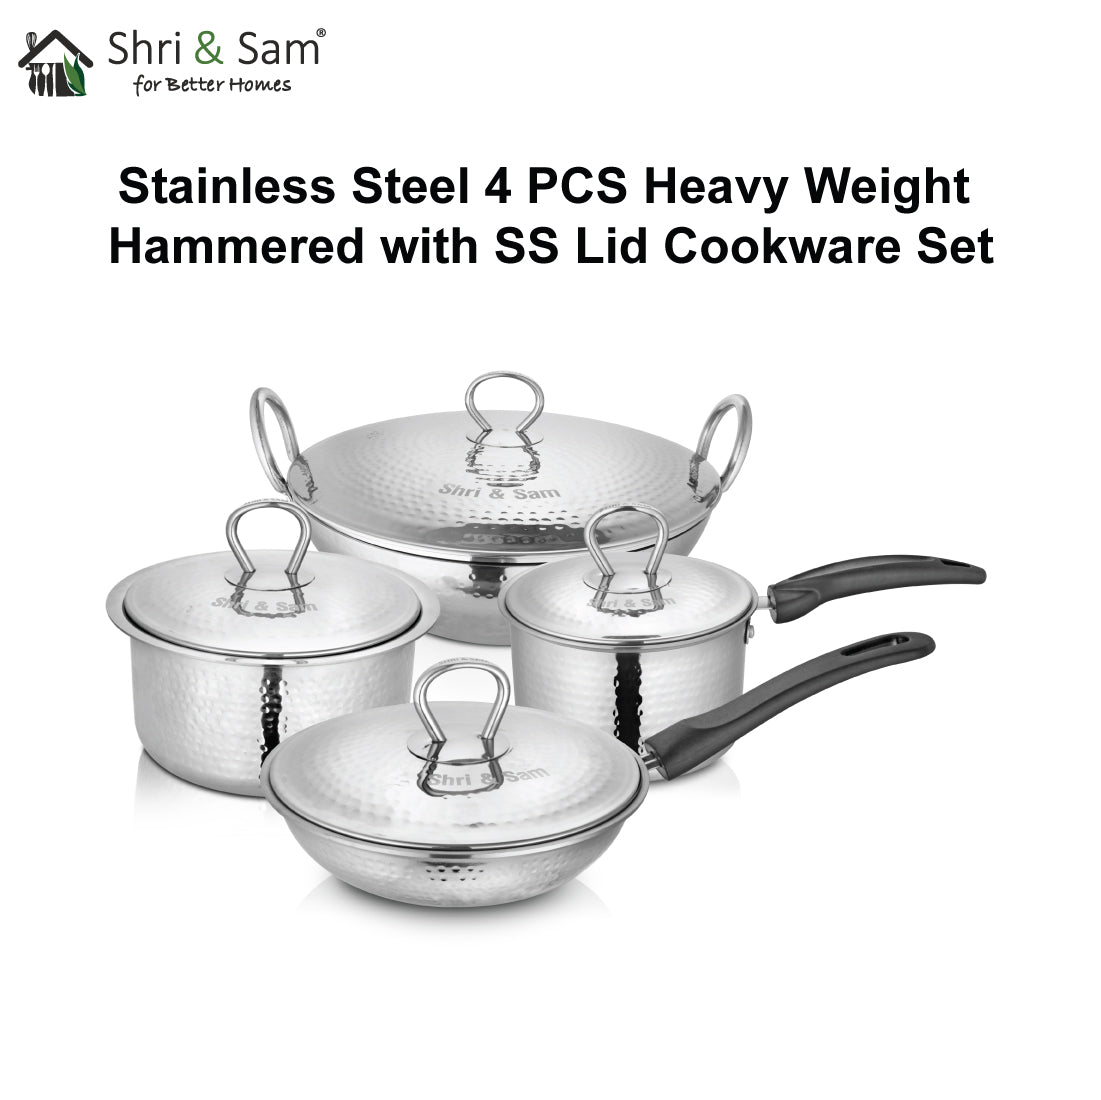 Stainless Steel 4 PCS Heavy Weight Hammered STARTER Cookware Set with Lid